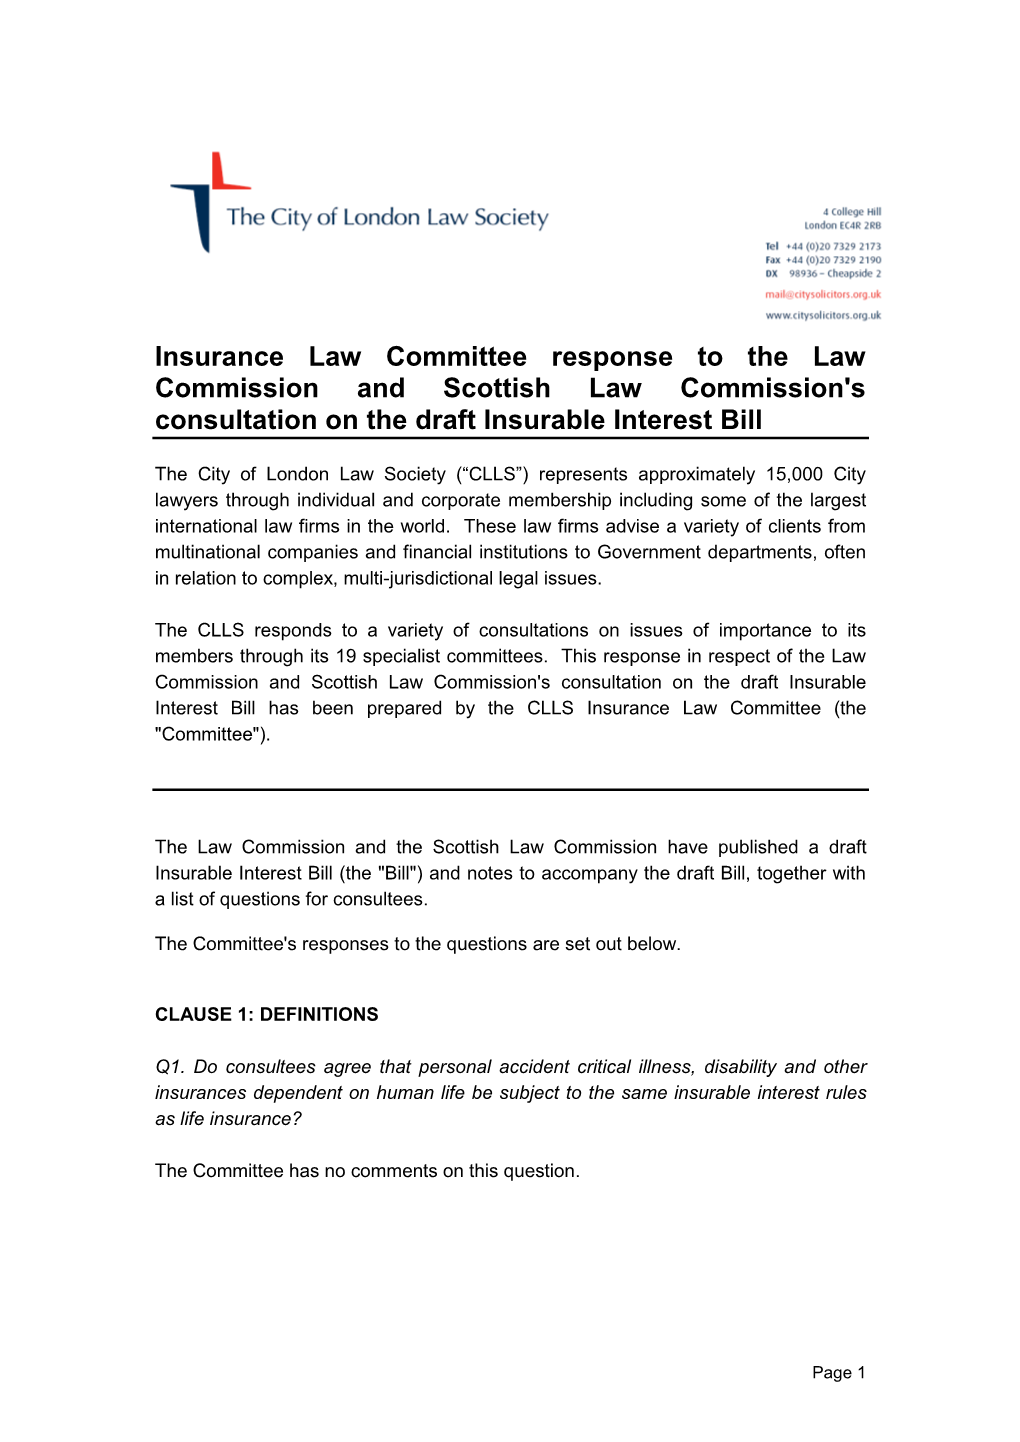 Insurance Law Committee Response to the Law Commission and Scottish Law Commission's Consultation on the Draft Insurable Interest Bill